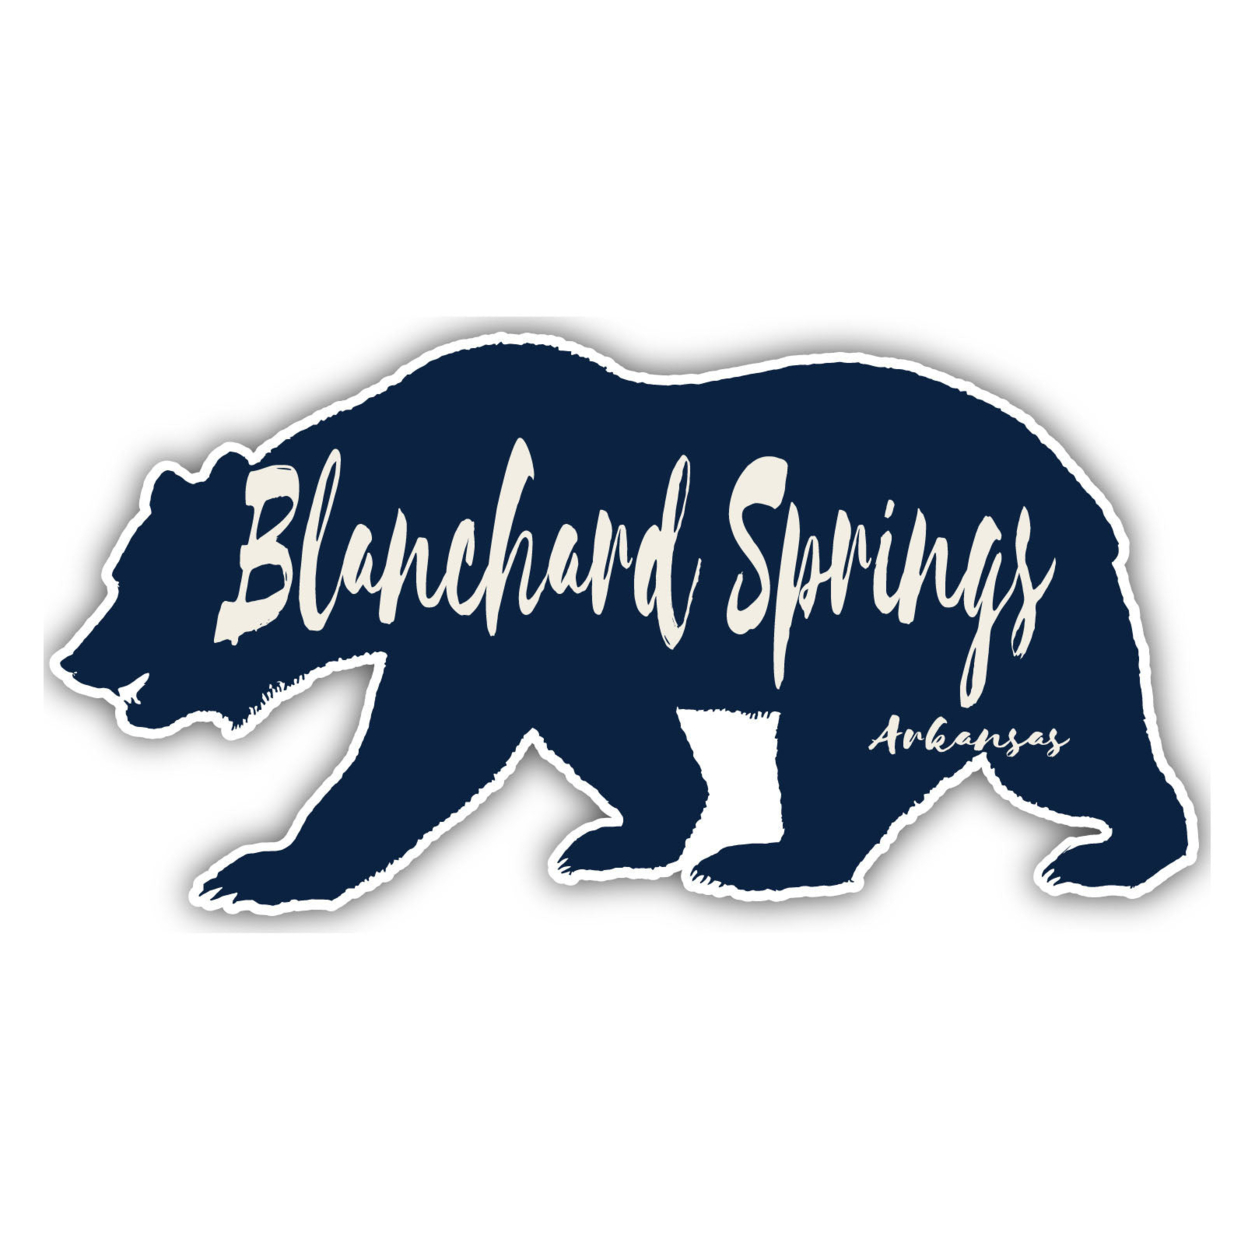 Blanchard Springs Arkansas Souvenir Decorative Stickers (Choose Theme And Size) - 4-Pack, 12-Inch, Bear